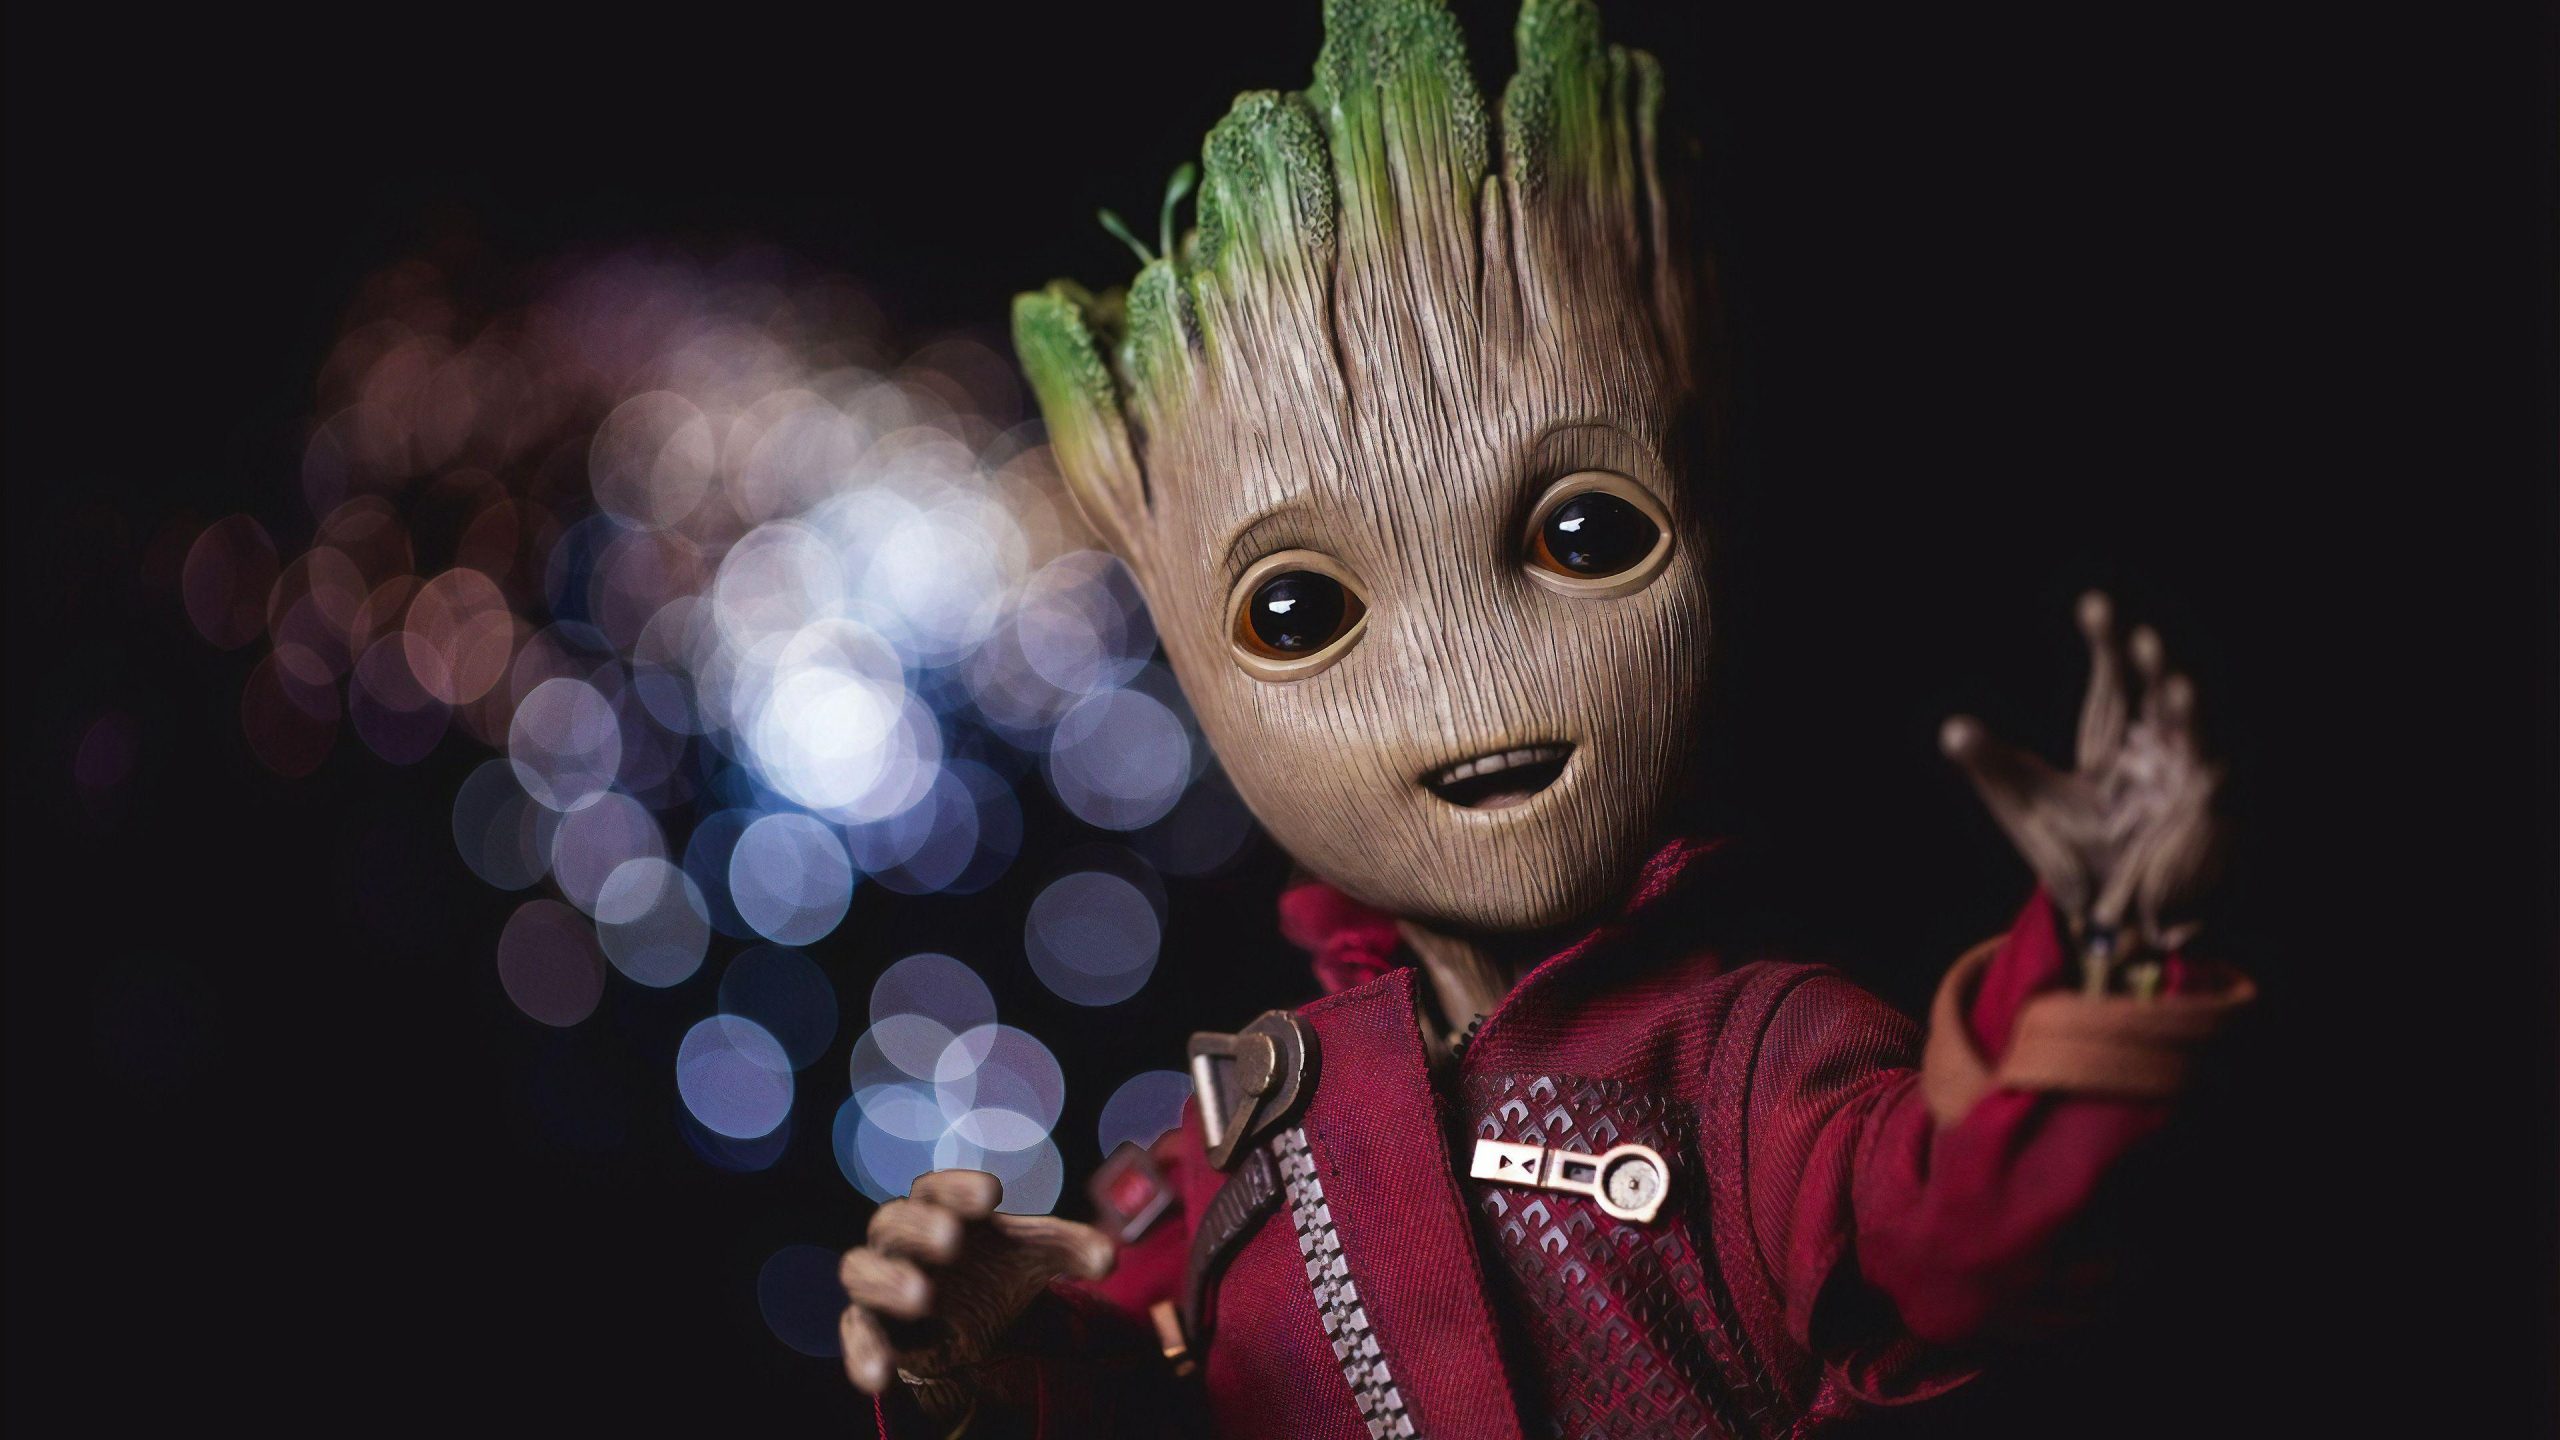 Cute Baby Groot Guardians Of The Galaxy Desktop Wallpaper Hd, Cute Baby Groot Guardians Of The Galaxy, Movies